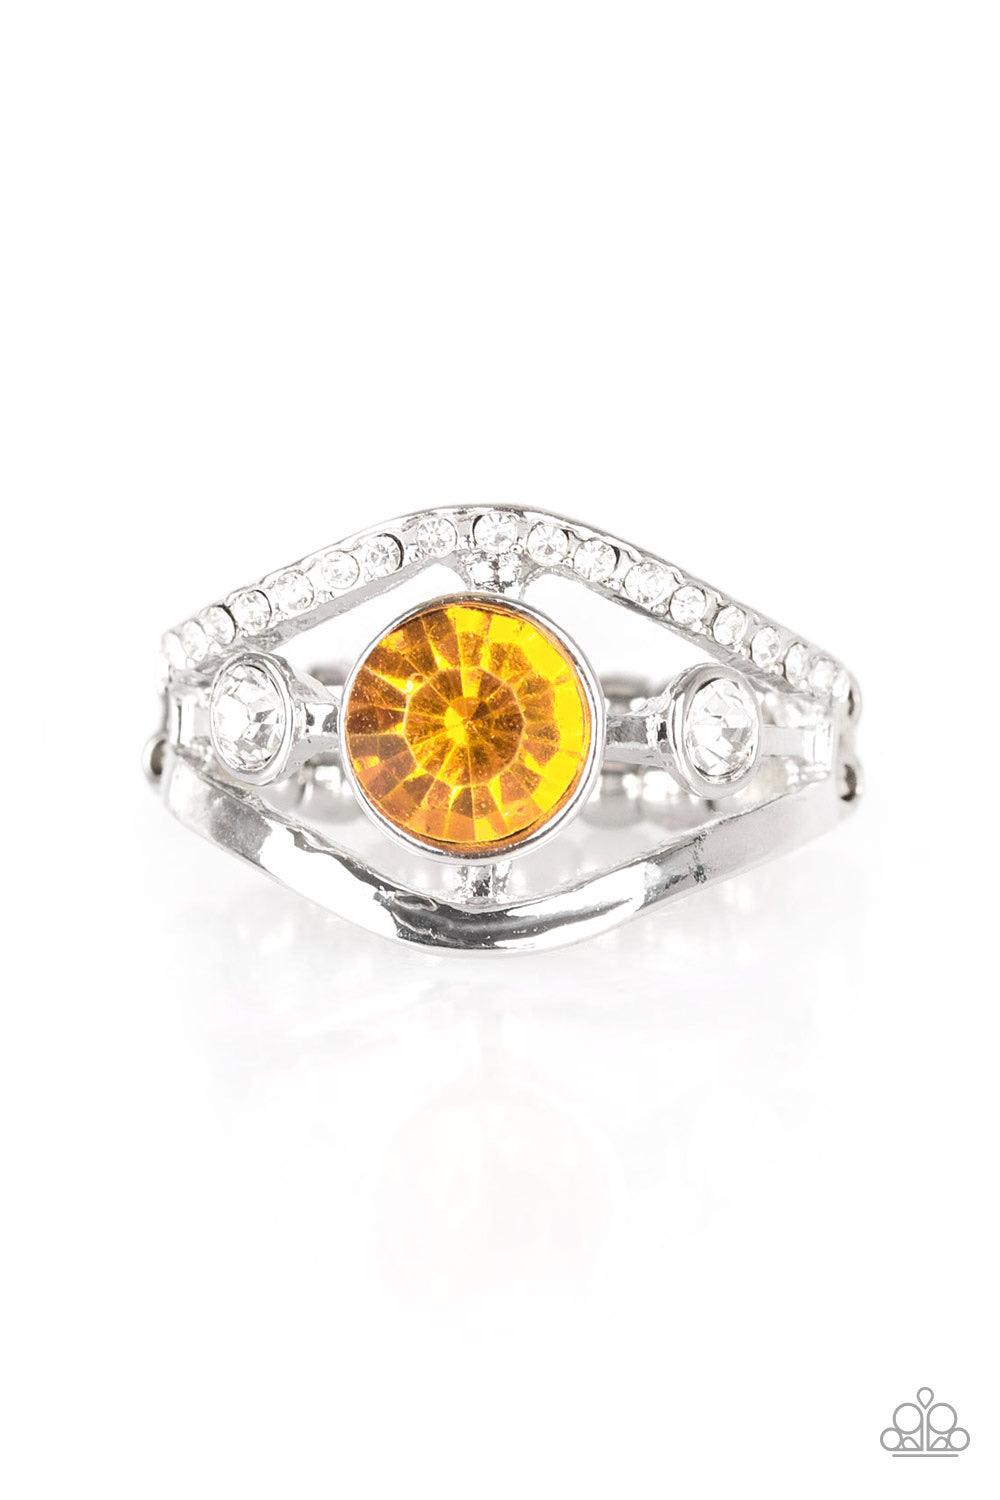 Paparazzi Accessories Rich with Richness - Yellow A white rhinestone encrusted band and glistening silver band wave around a radiating yellow and white rhinestone center for a refined look. Features a dainty stretchy band for a flexible fit. Jewelry